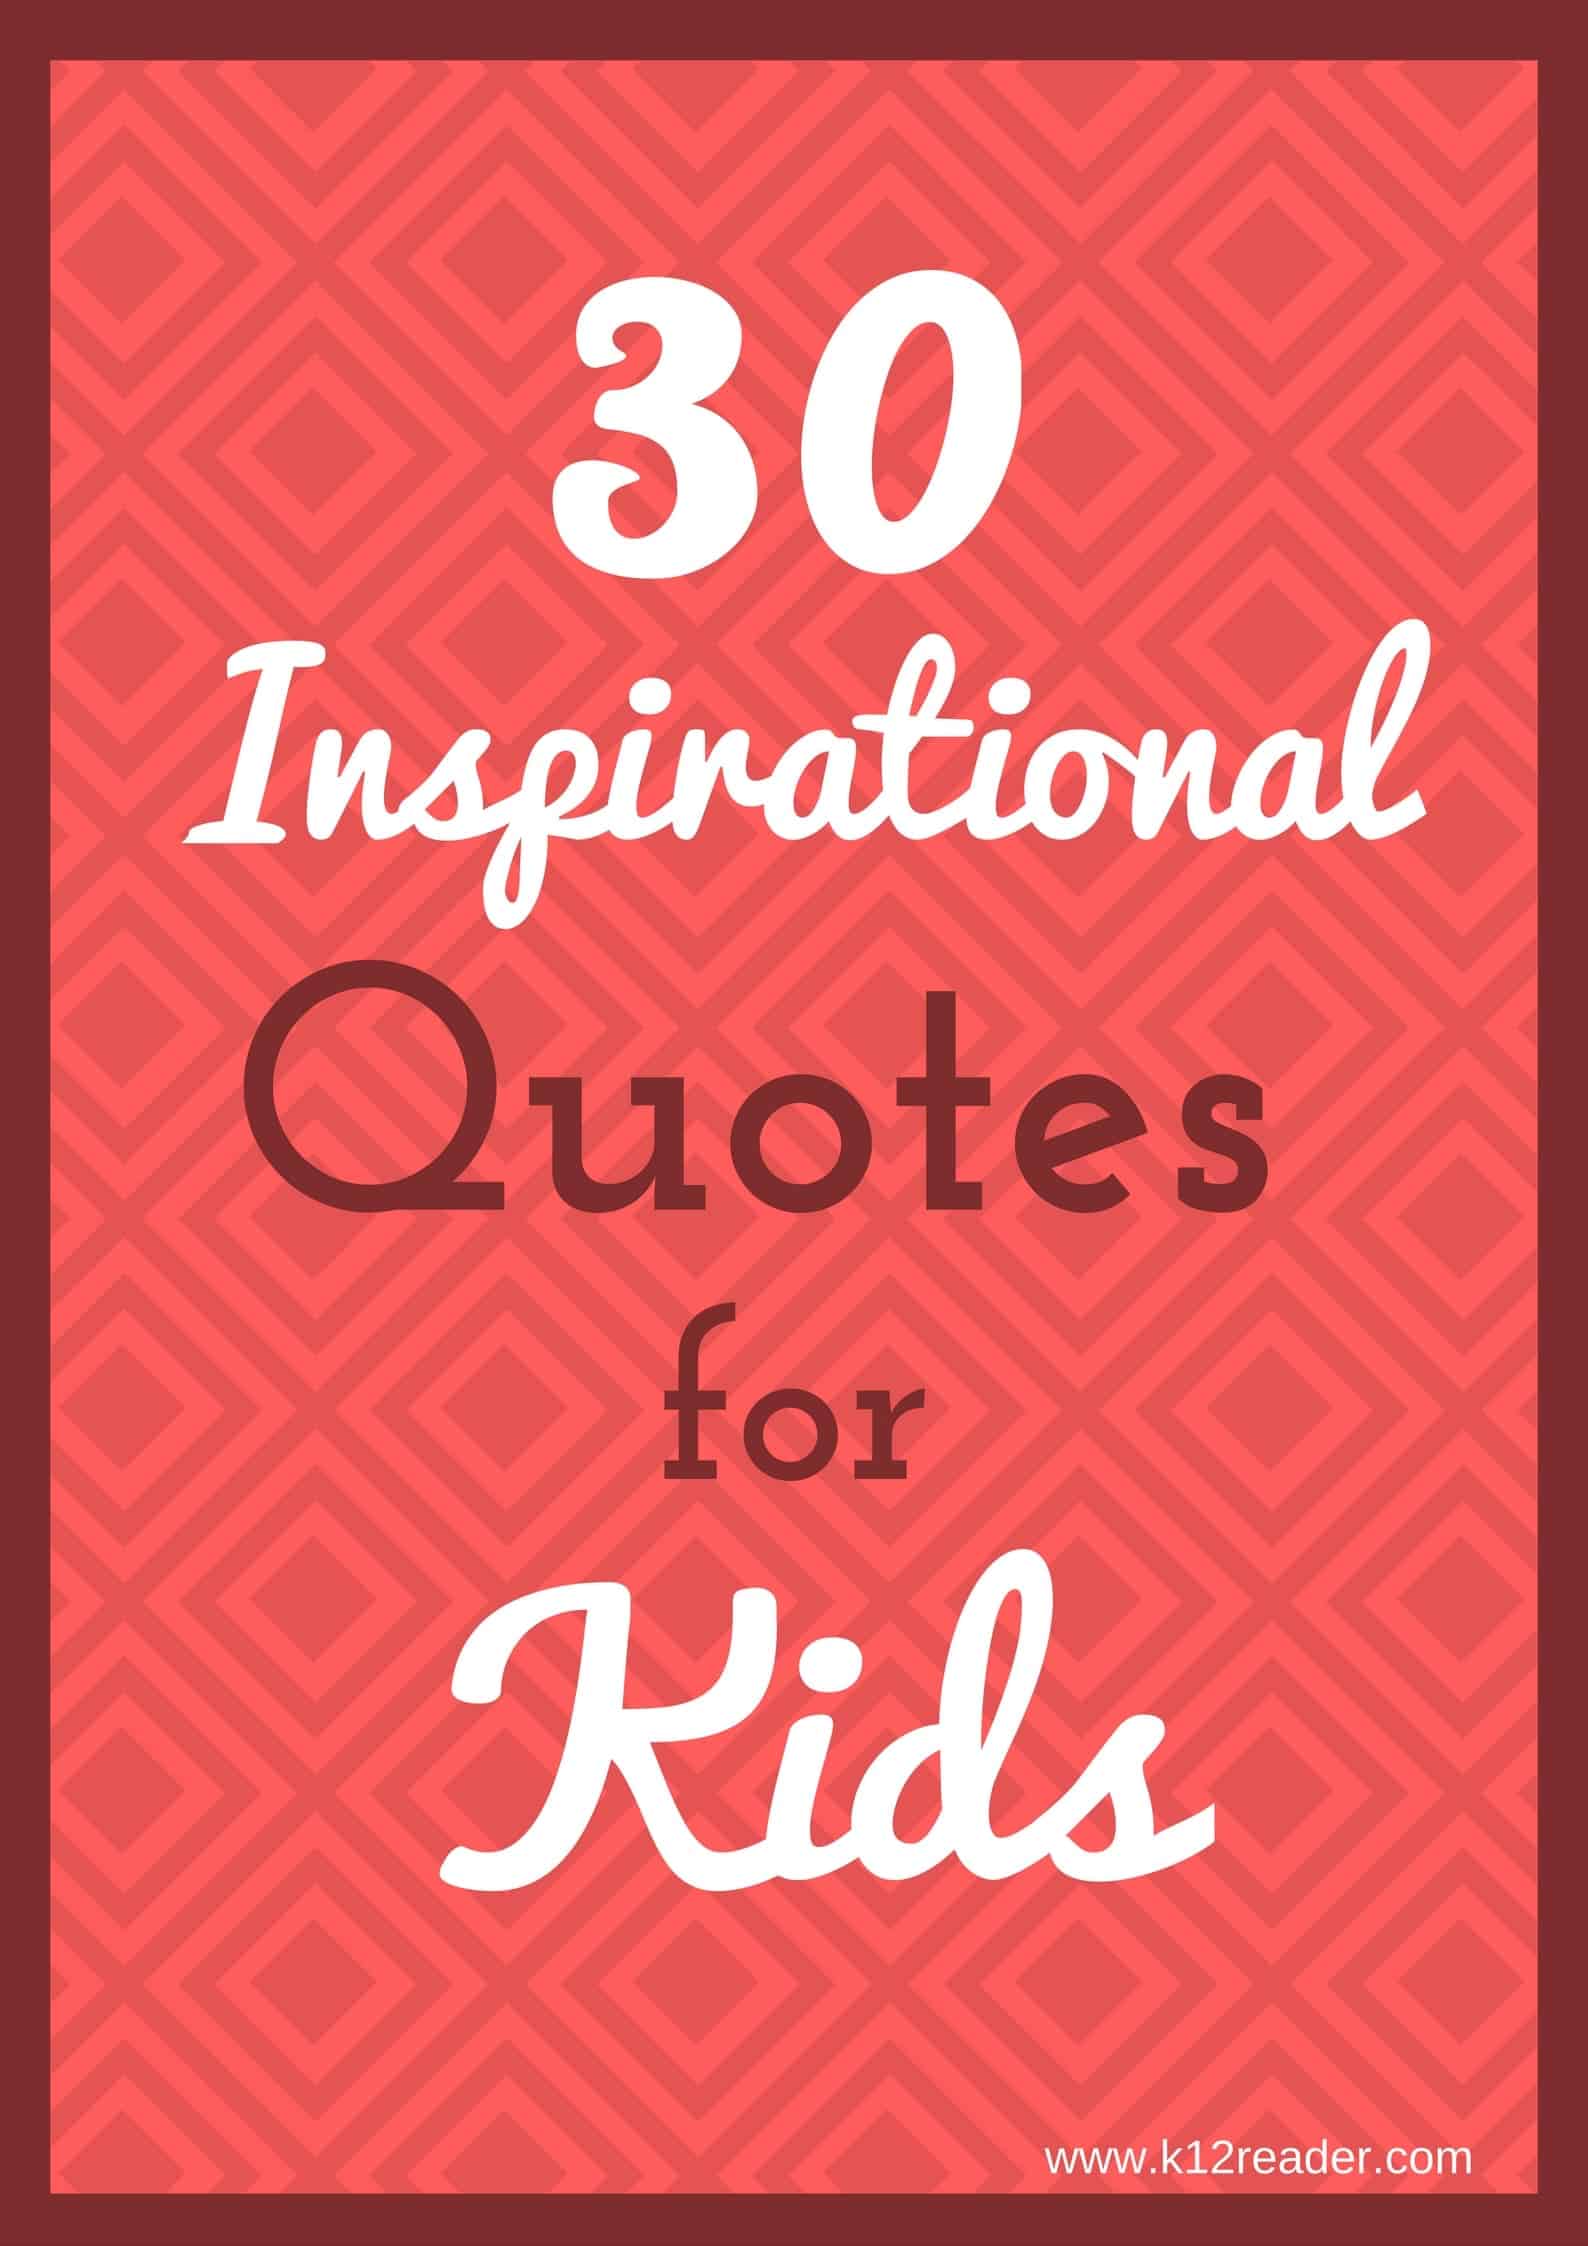 30-inspirational-quotes-for-kids